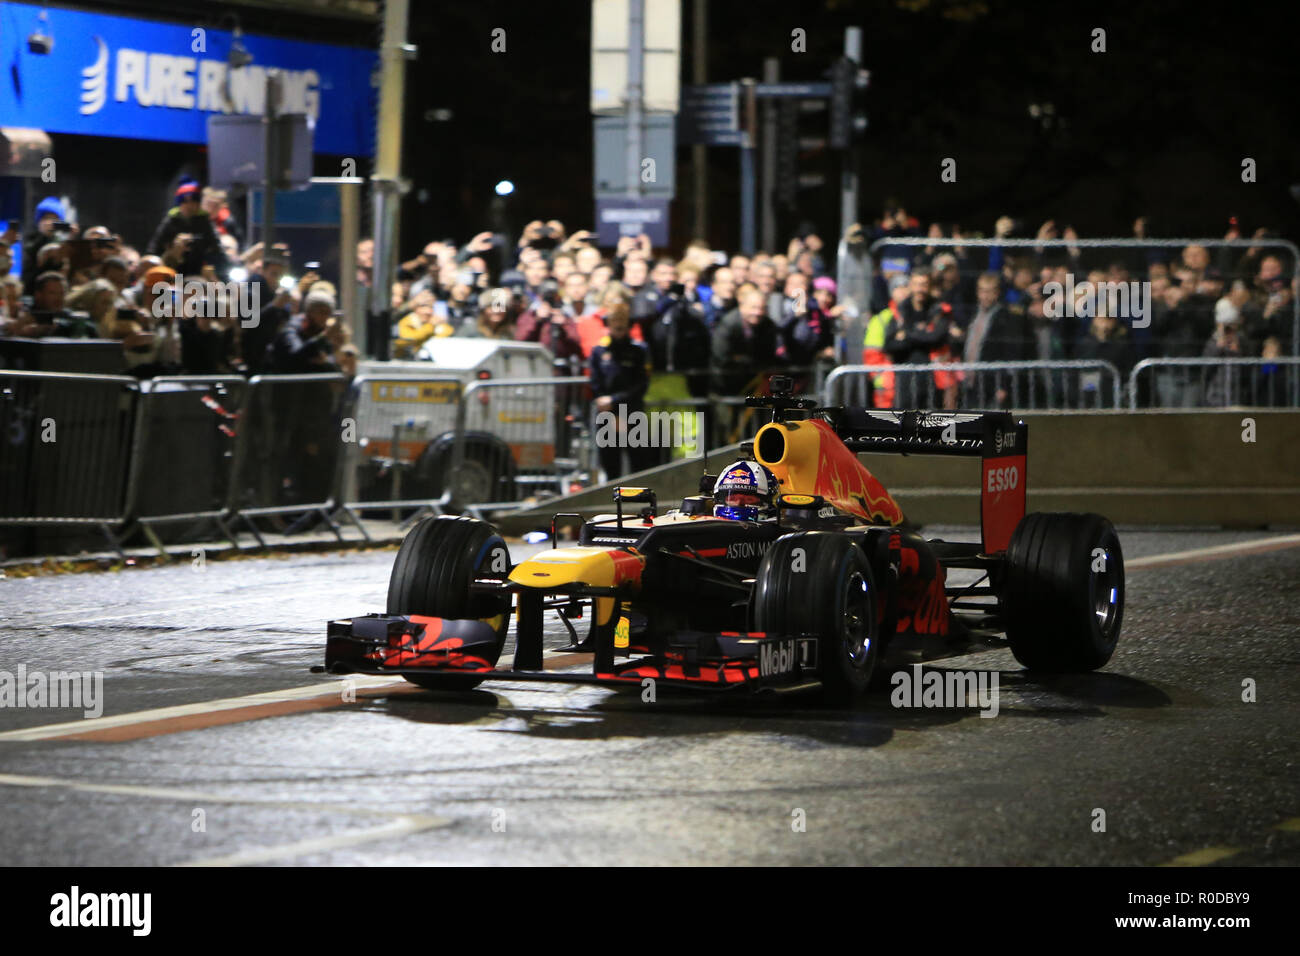 Belfast, Northern Ireland, UK. 3rd November, 2018. Highlights from Redbull F1 Showrun Belfast. Racing legend David Coulthard brought the adrenaline pumping roar of his engine to the streets of Belfast Saturday 3rd of November, 2018. A show like no other, as the Red Bull Racing Formula 1 car performs a full repertoire of donuts, burnouts and speed stretches in front of Belfast's iconic City Hall. This one-of-a-kind show was free to attend gathered thousands. Credit: Irish Eye/Alamy Live News Stock Photo